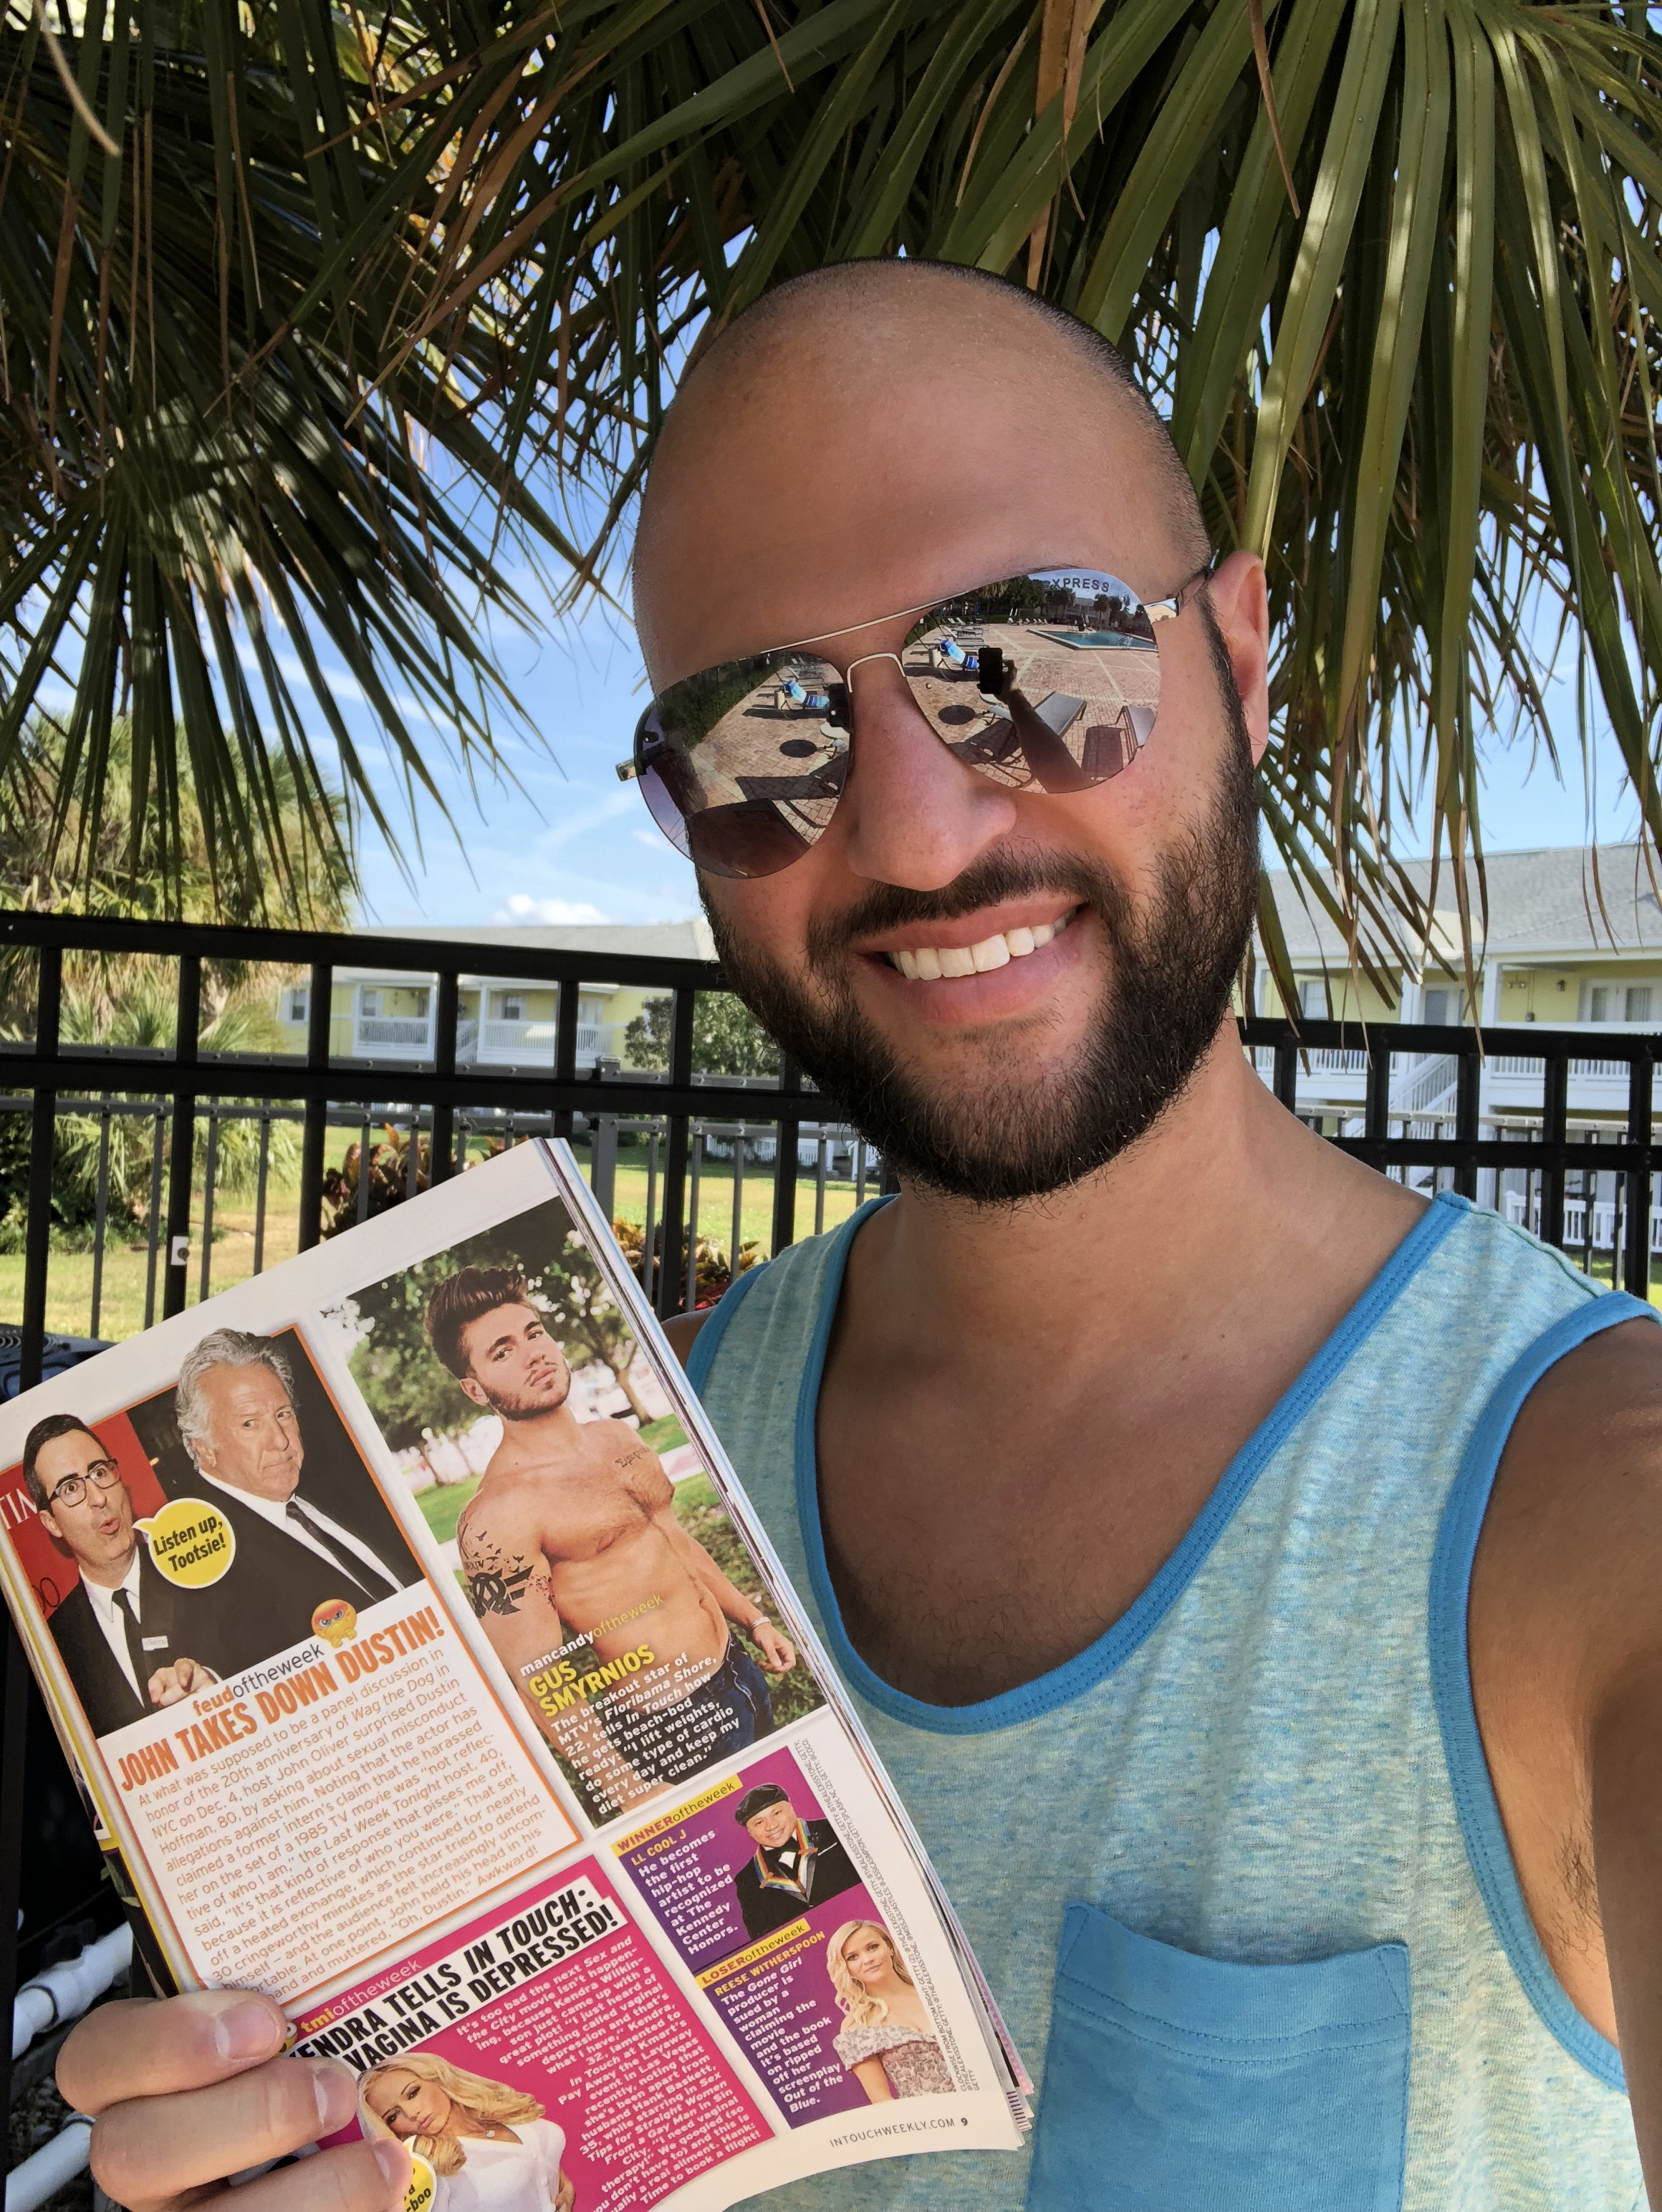 In Touch Weekly Magazine, Gus Caleb Smyrnios model, CJC Photography, Florida photographer, book cover photographer, romance book cover photographer